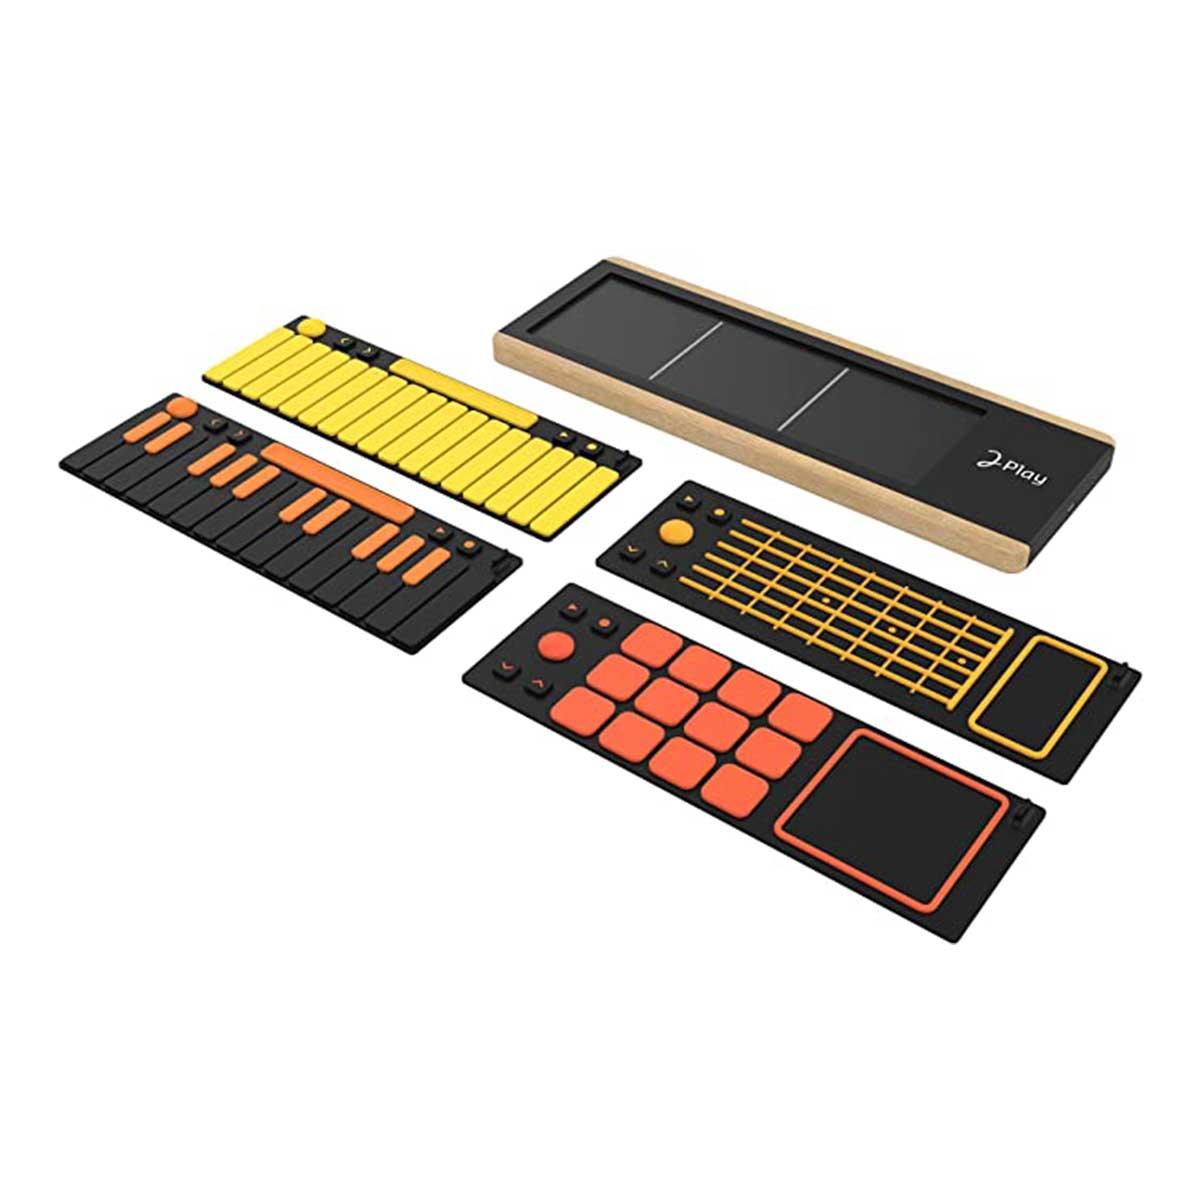 Joué Play Full Pack ( Board + 4 Pads) - Fire Edition